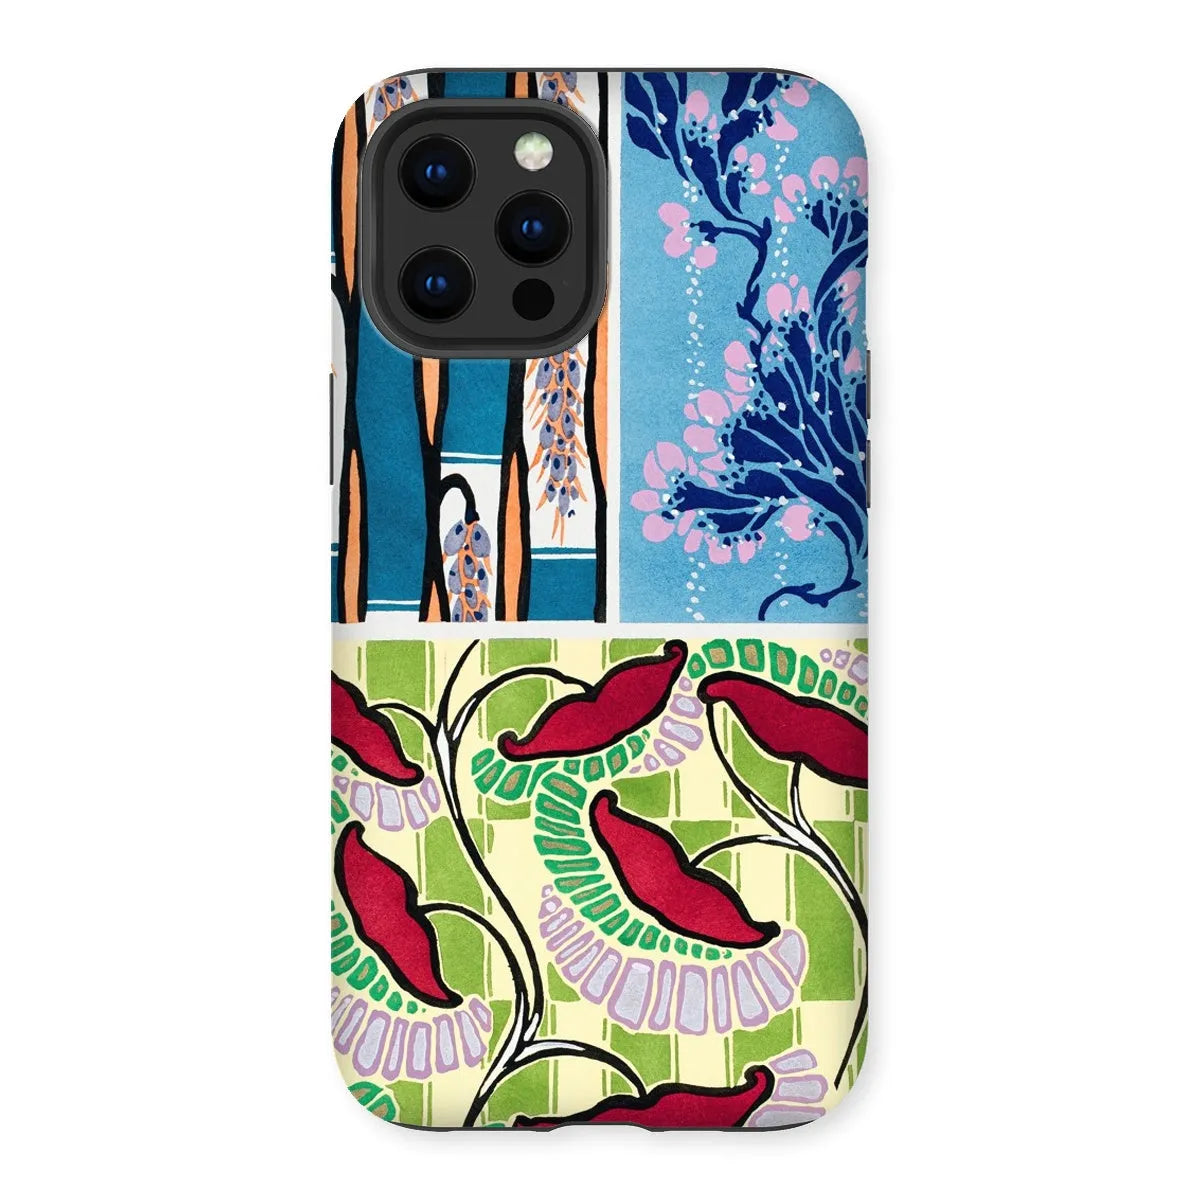 Floral Kitsch Aesthetic Art Phone Case - E.a. Séguy - Iphone 13 Pro Max / Matte - Mobile Phone Cases - Aesthetic Art